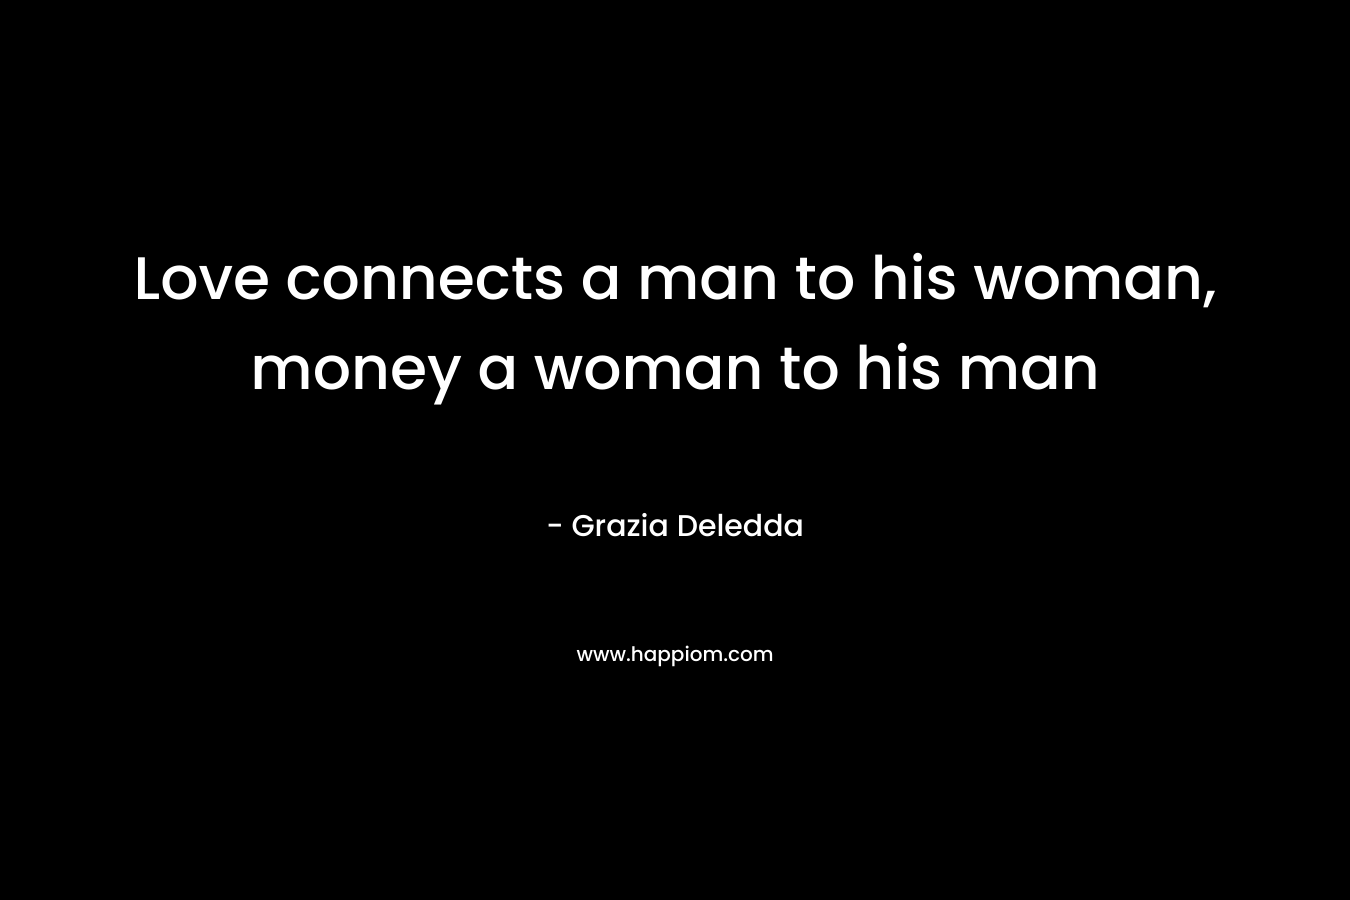 Love connects a man to his woman, money a woman to his man – Grazia Deledda